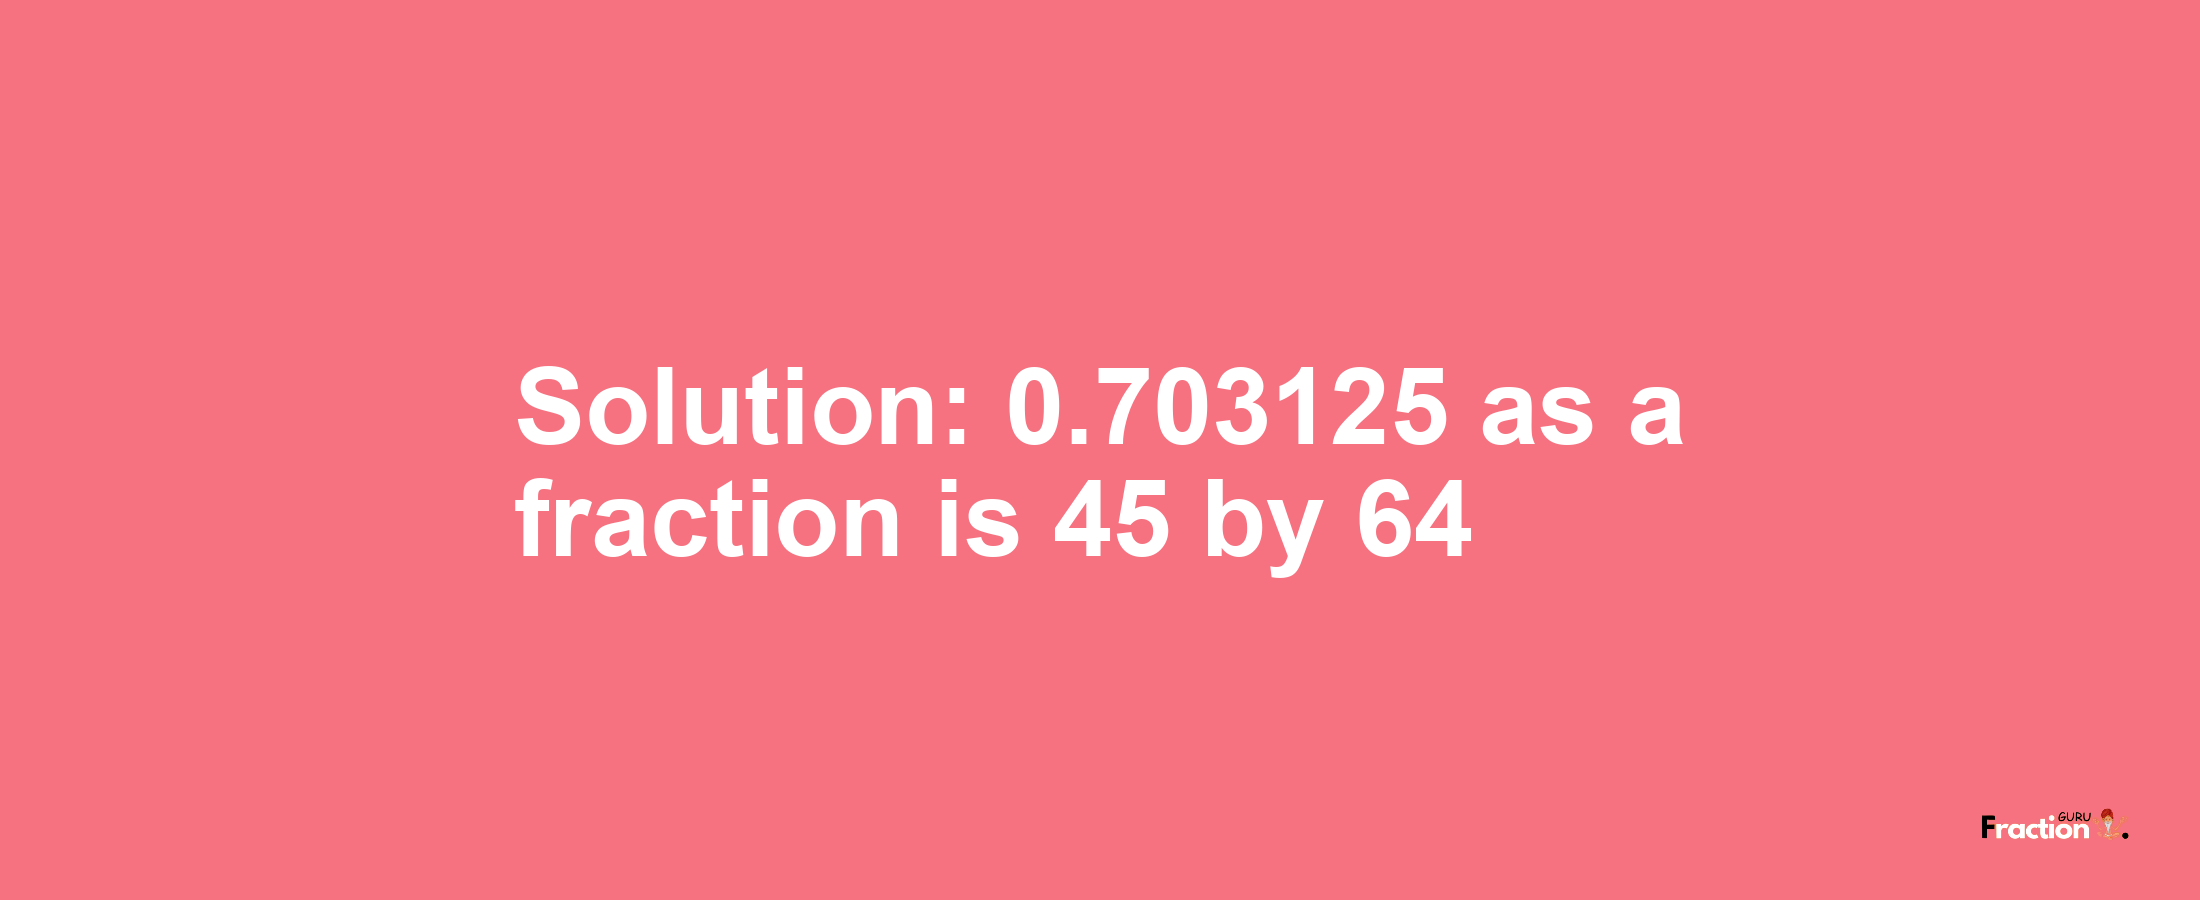 Solution:0.703125 as a fraction is 45/64